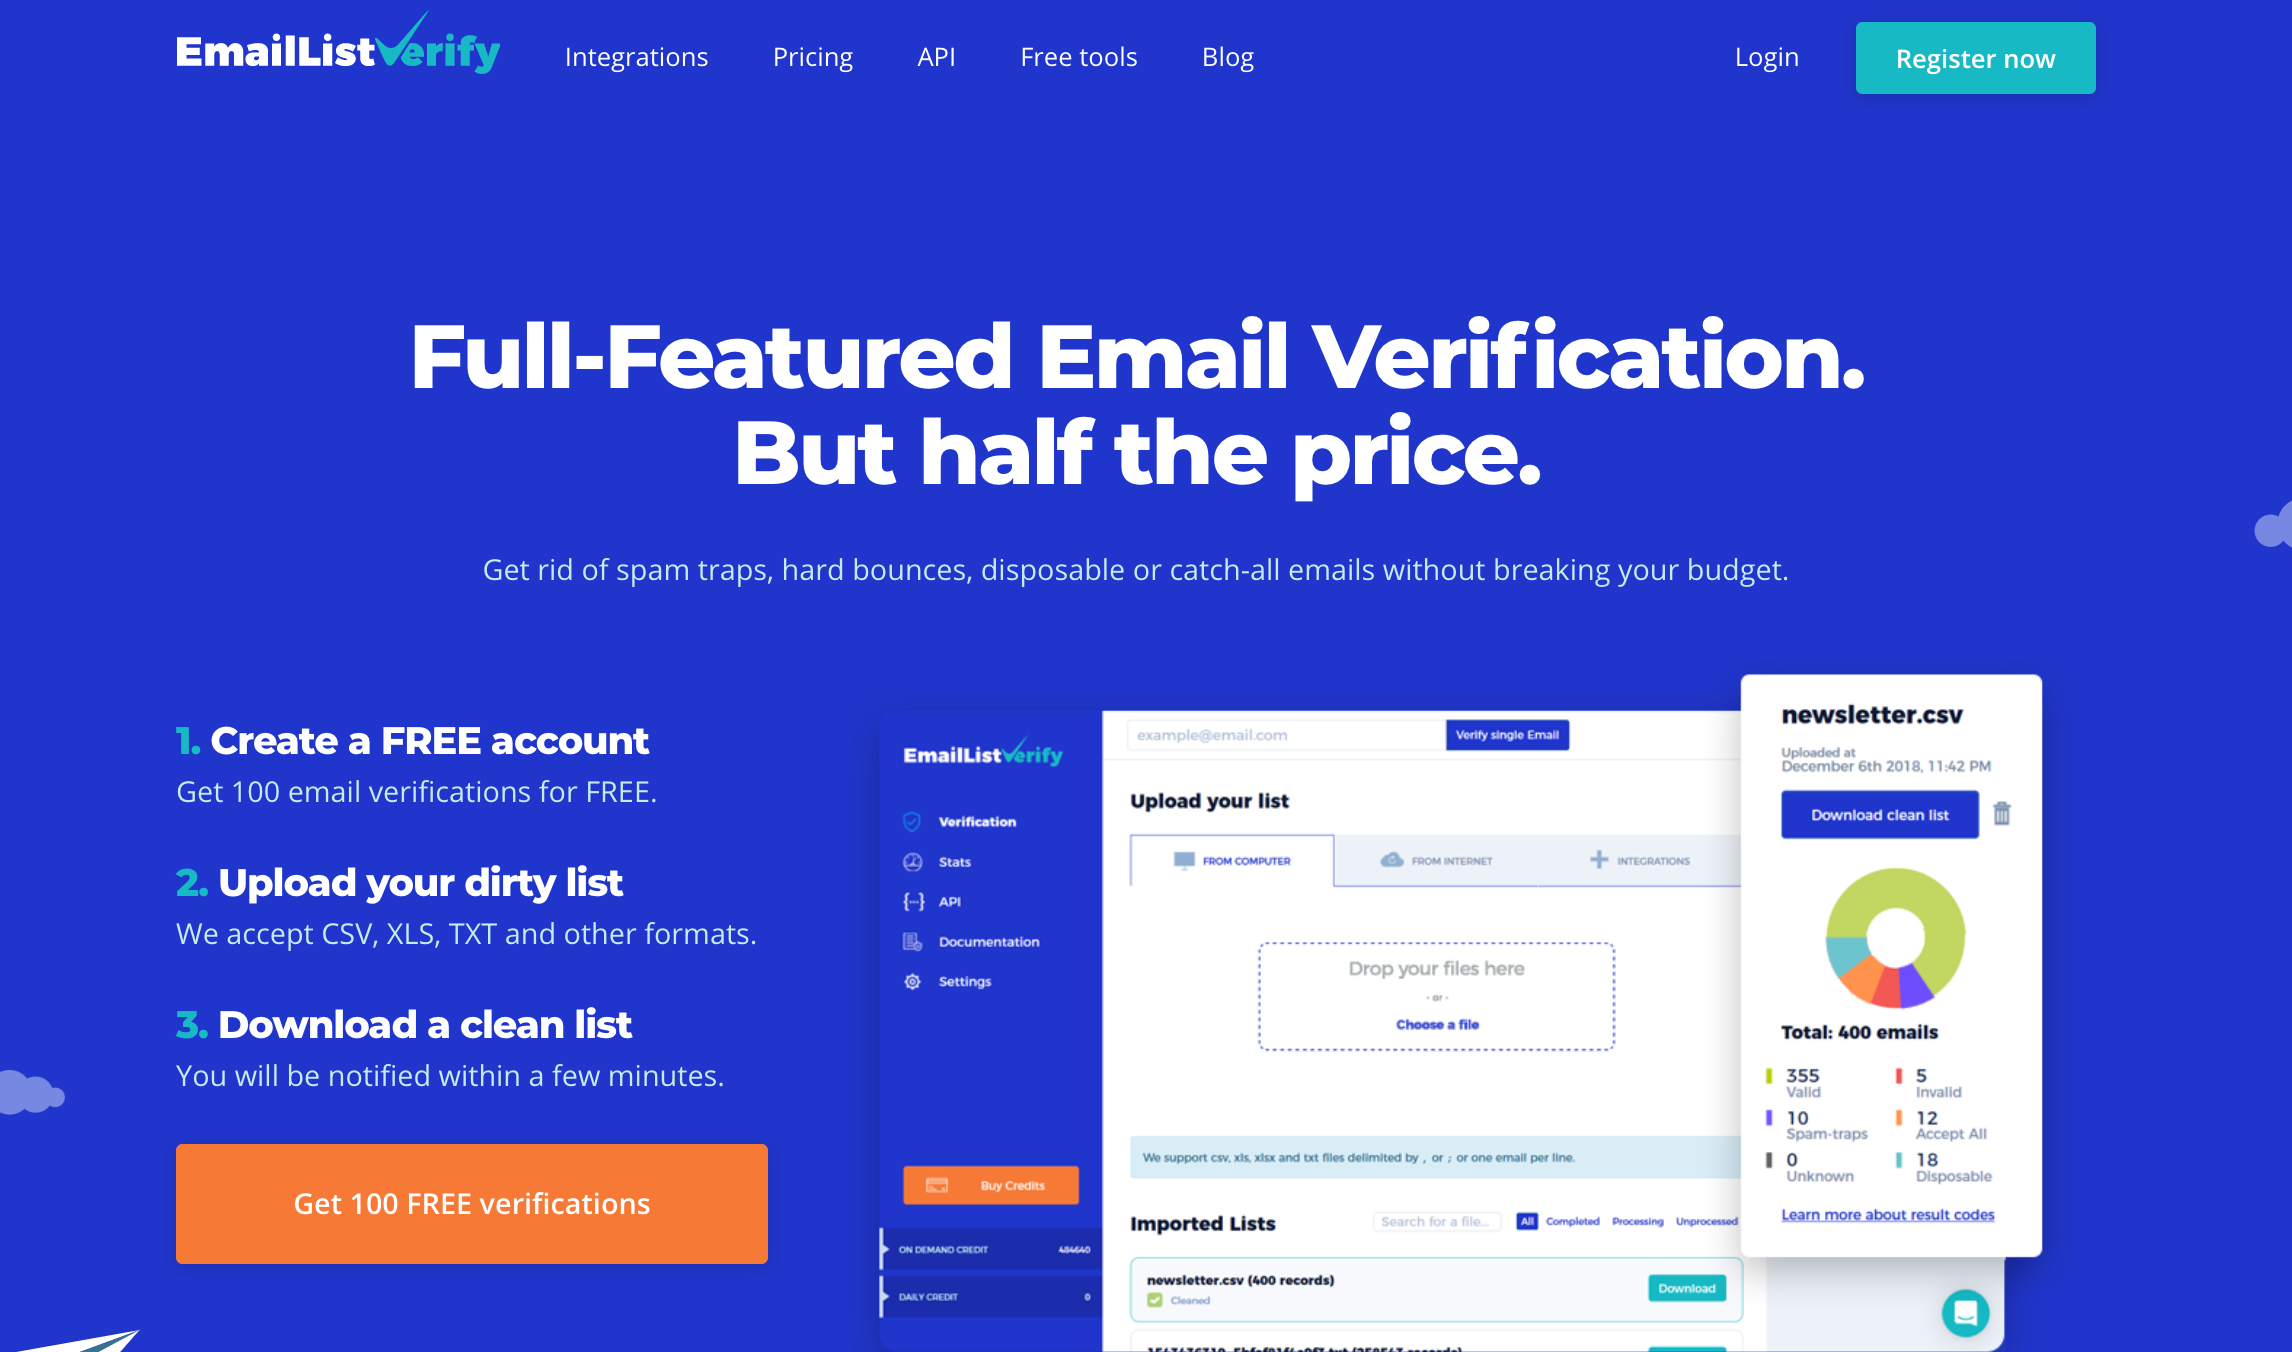 Email List Verify Review 2022: Can It Really Verify Bulk Email List?